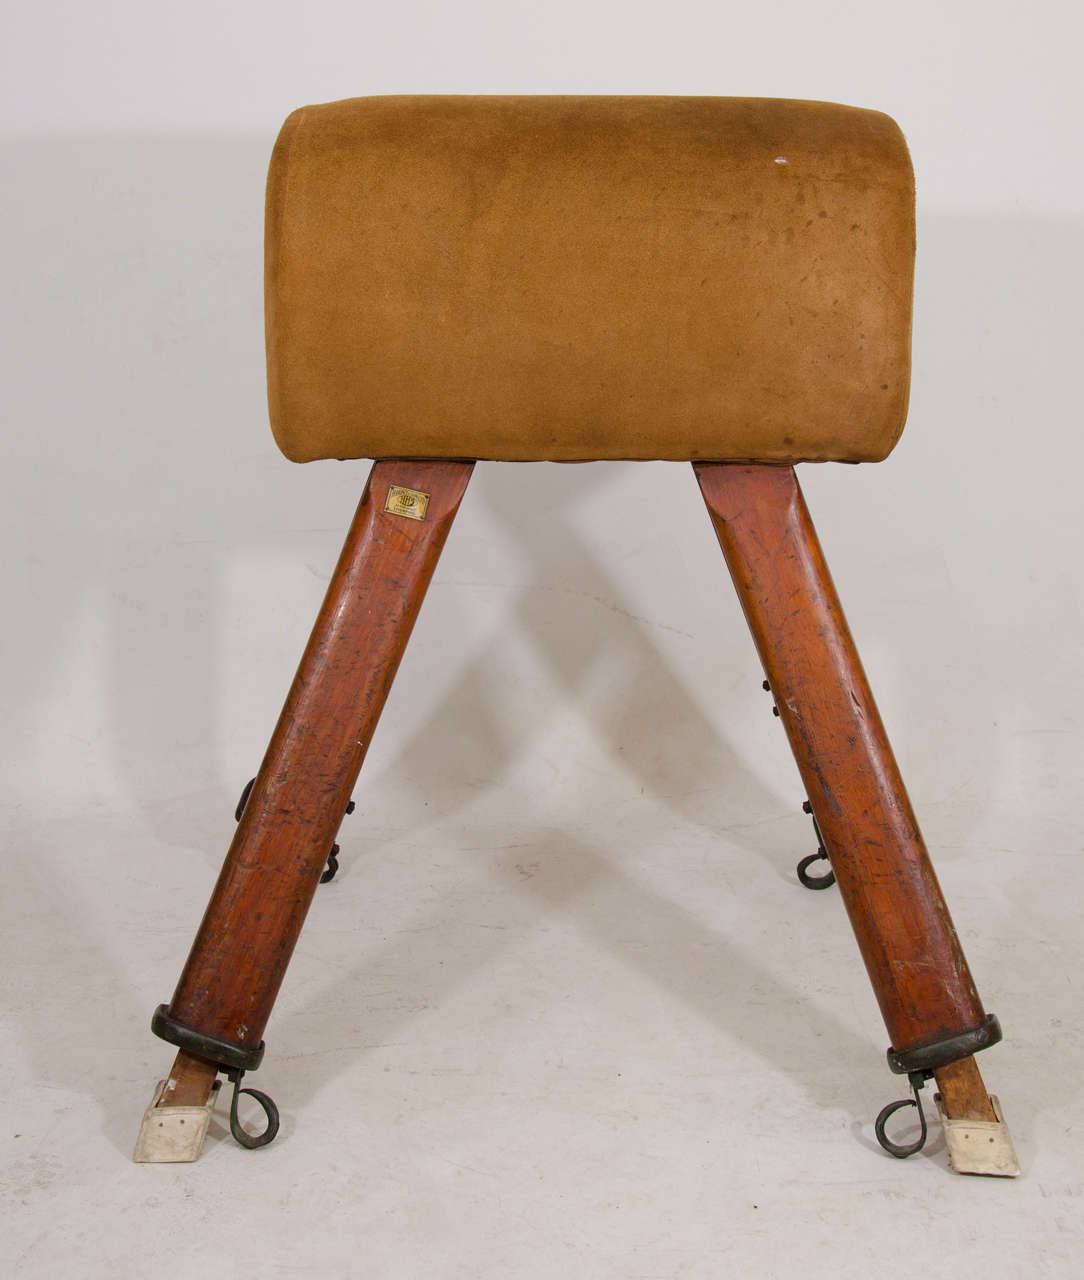 Remarkable pommel horse by H. Hunt & Sons of Liverpool in suede and oak. The legs are adjustable. This piece has great character as a visual element as it is; some designers might choose to use the nicely worn suede part as a bench top and the legs